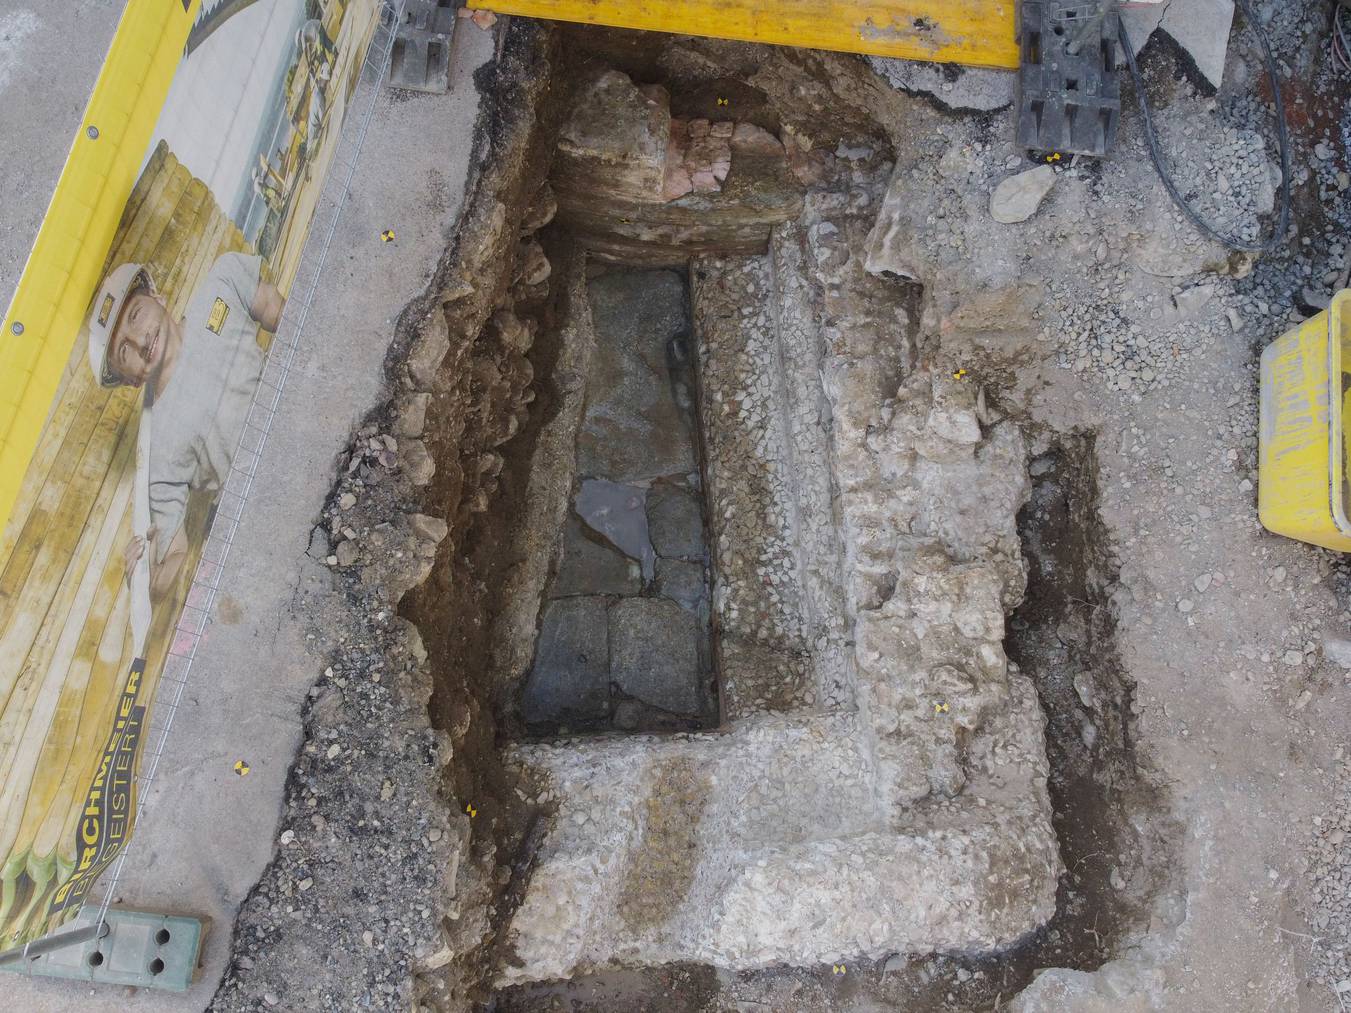 Construction workers uncover a 2nd century Roman bath